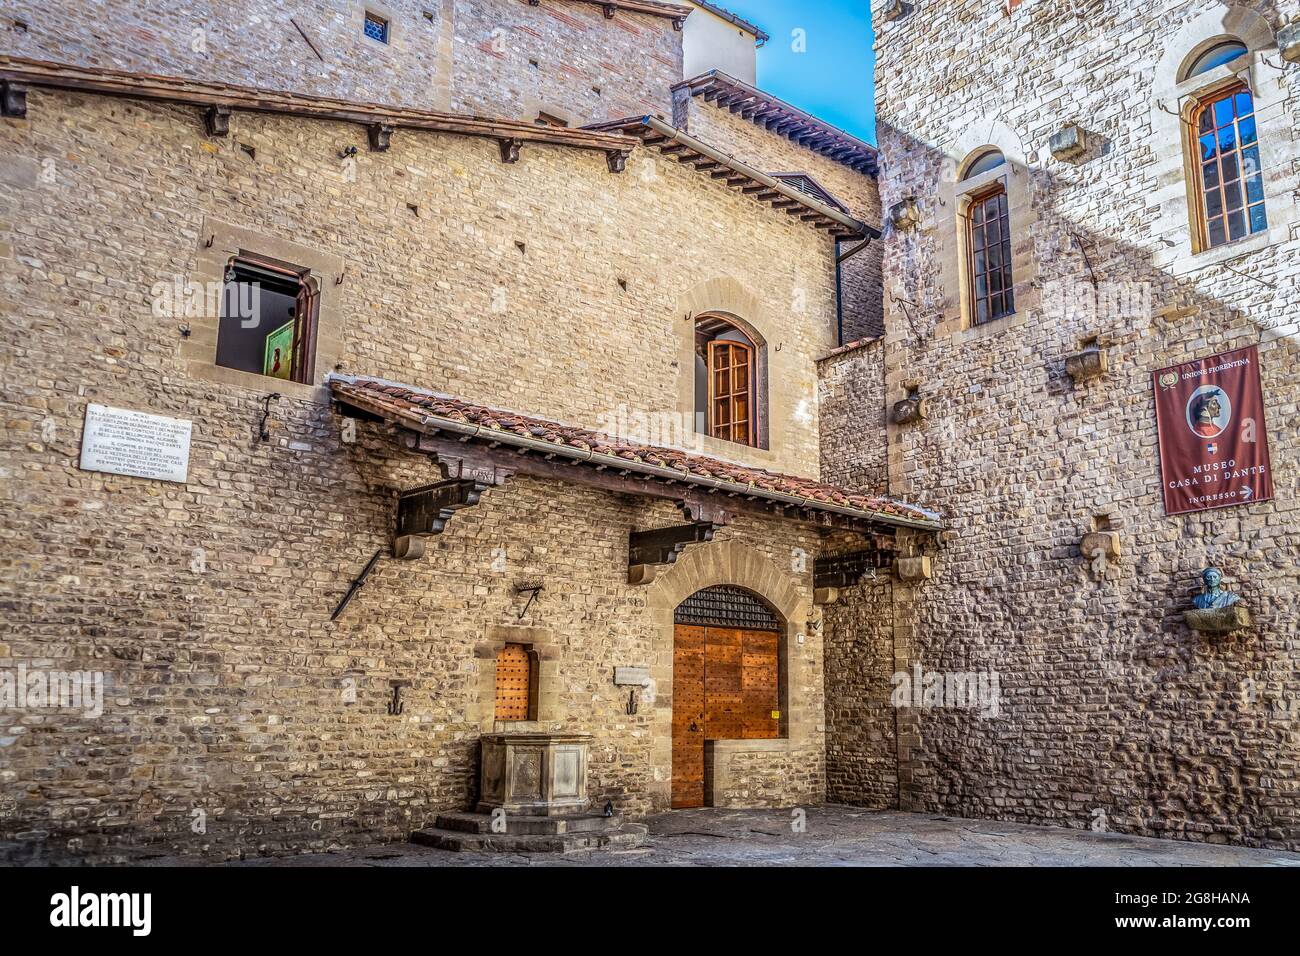 House museum of Italian poet Dante Alighieri, built in the 19th century where once he had his original house, Florence, Tuscany region, Italy Stock Photo